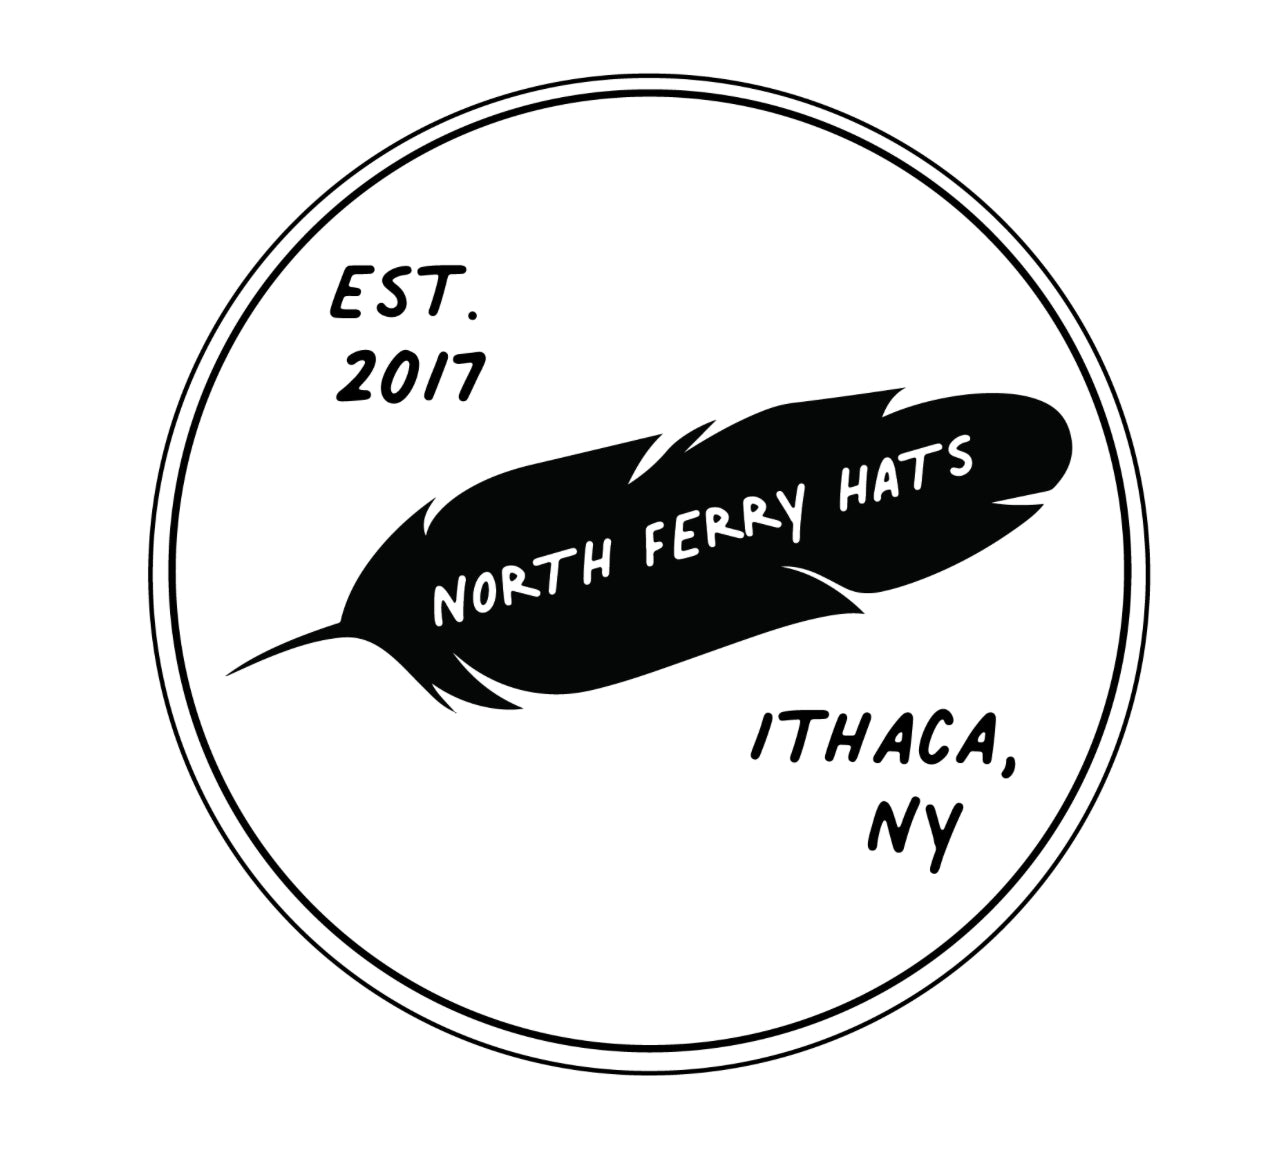 North Ferry Hats